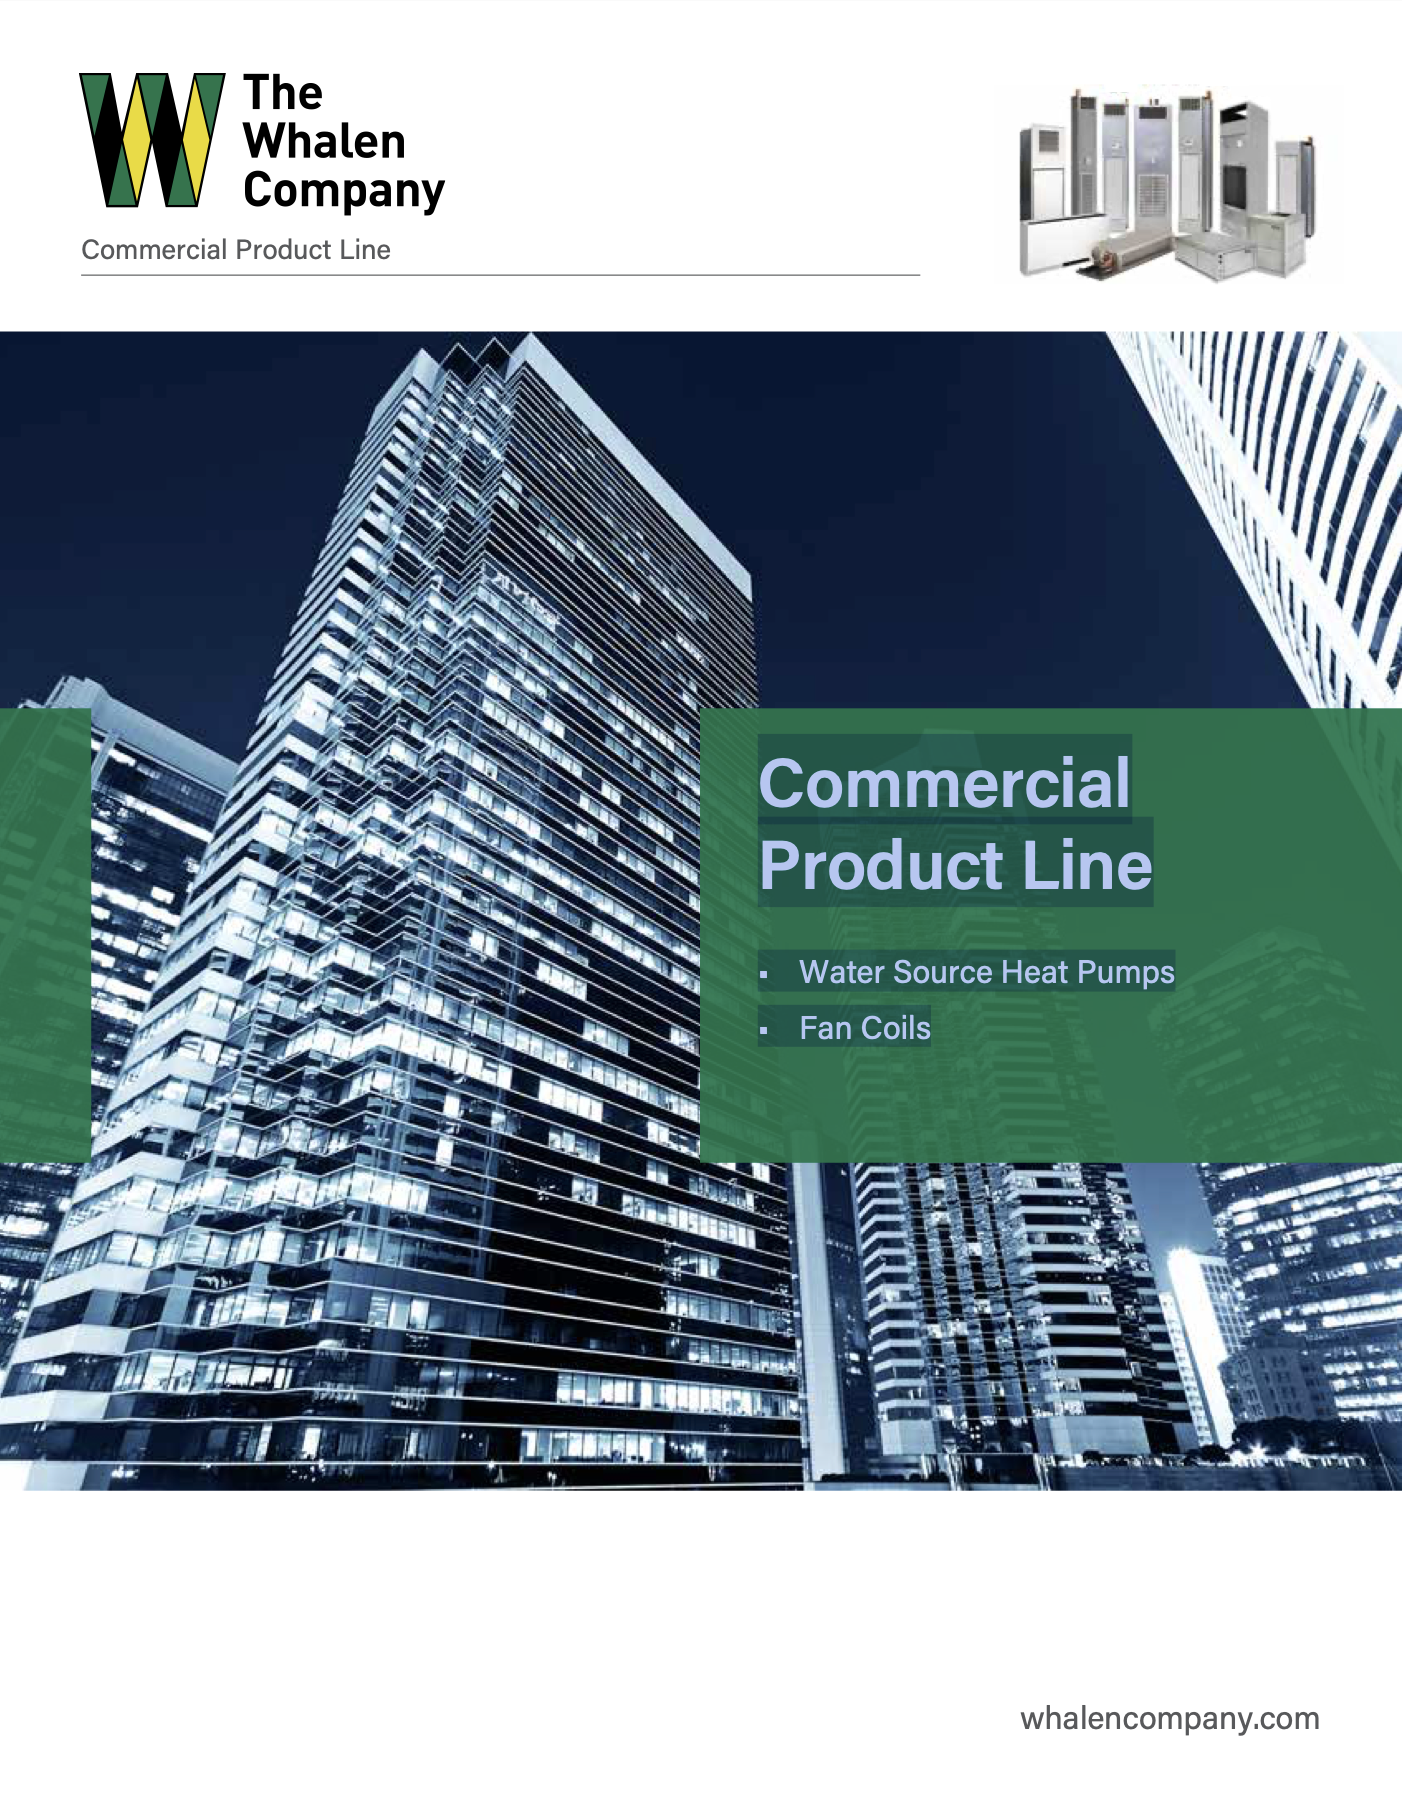 The Whalen Company Commercial Product Line CATALOG for Water Source Heat Pumps and Fan Coils